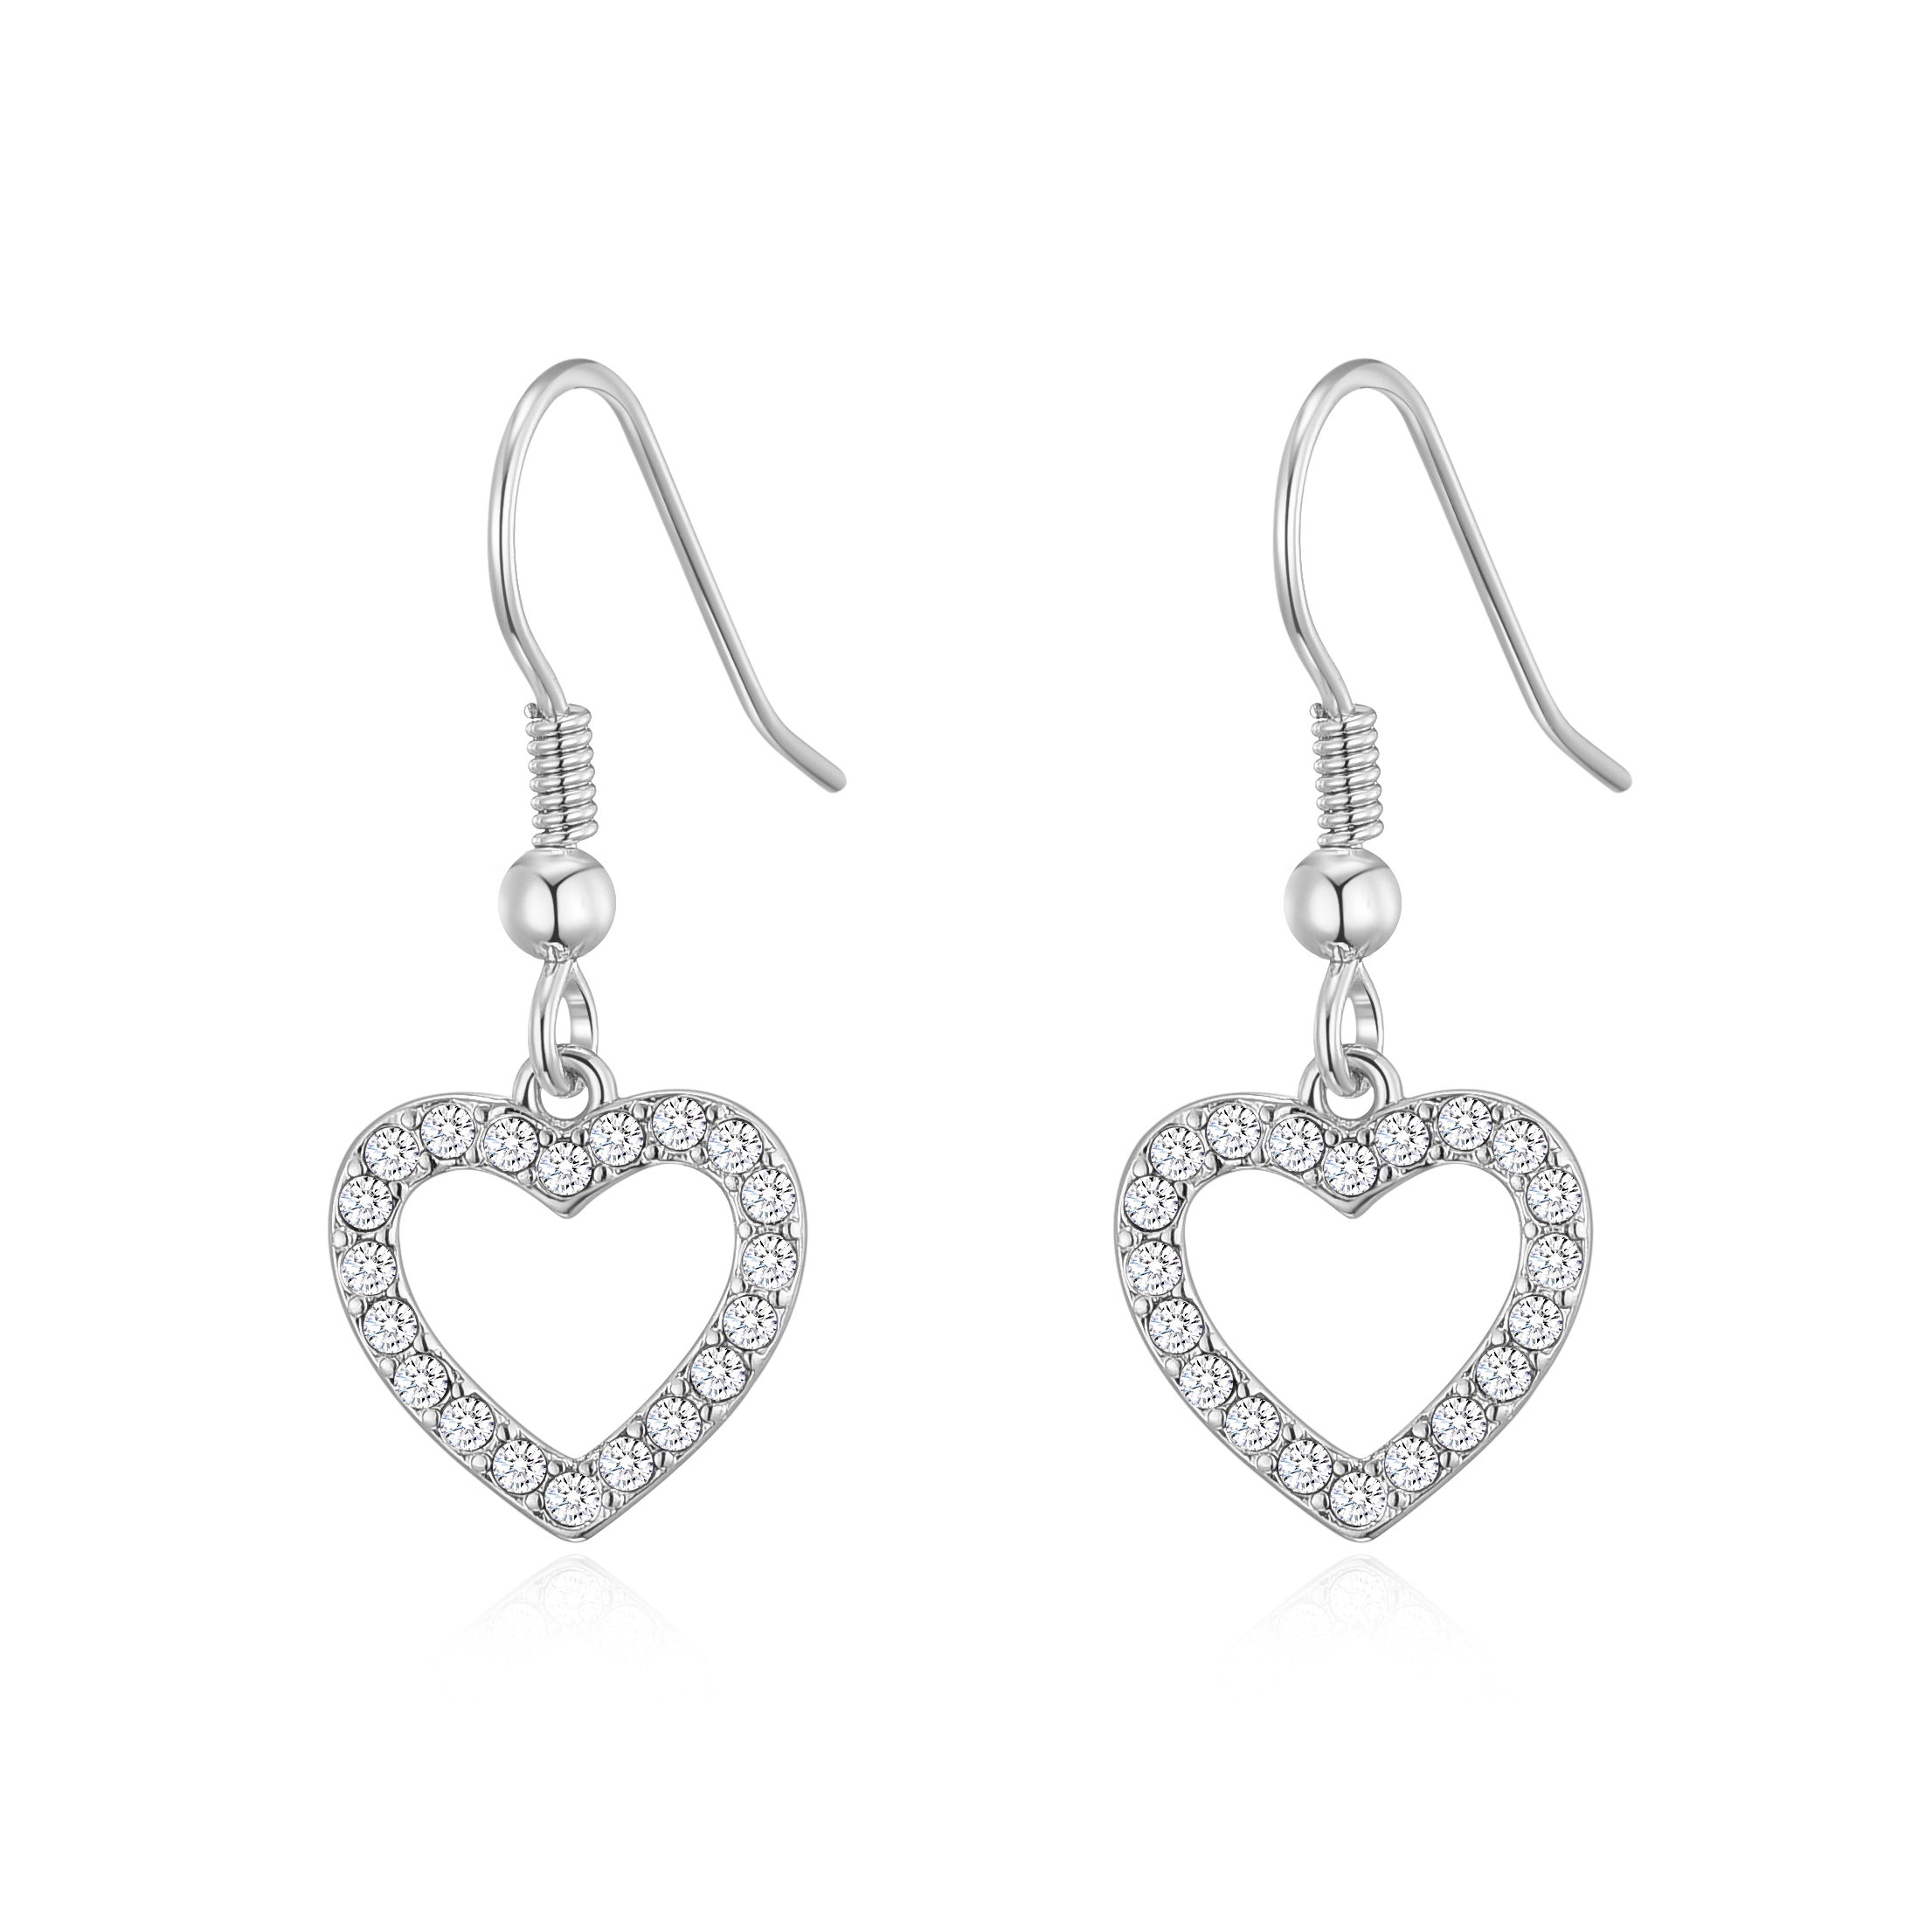 Silver Plated Open Heart Drop Earrings Created with Zircondia® Crystals by Philip Jones Jewellery